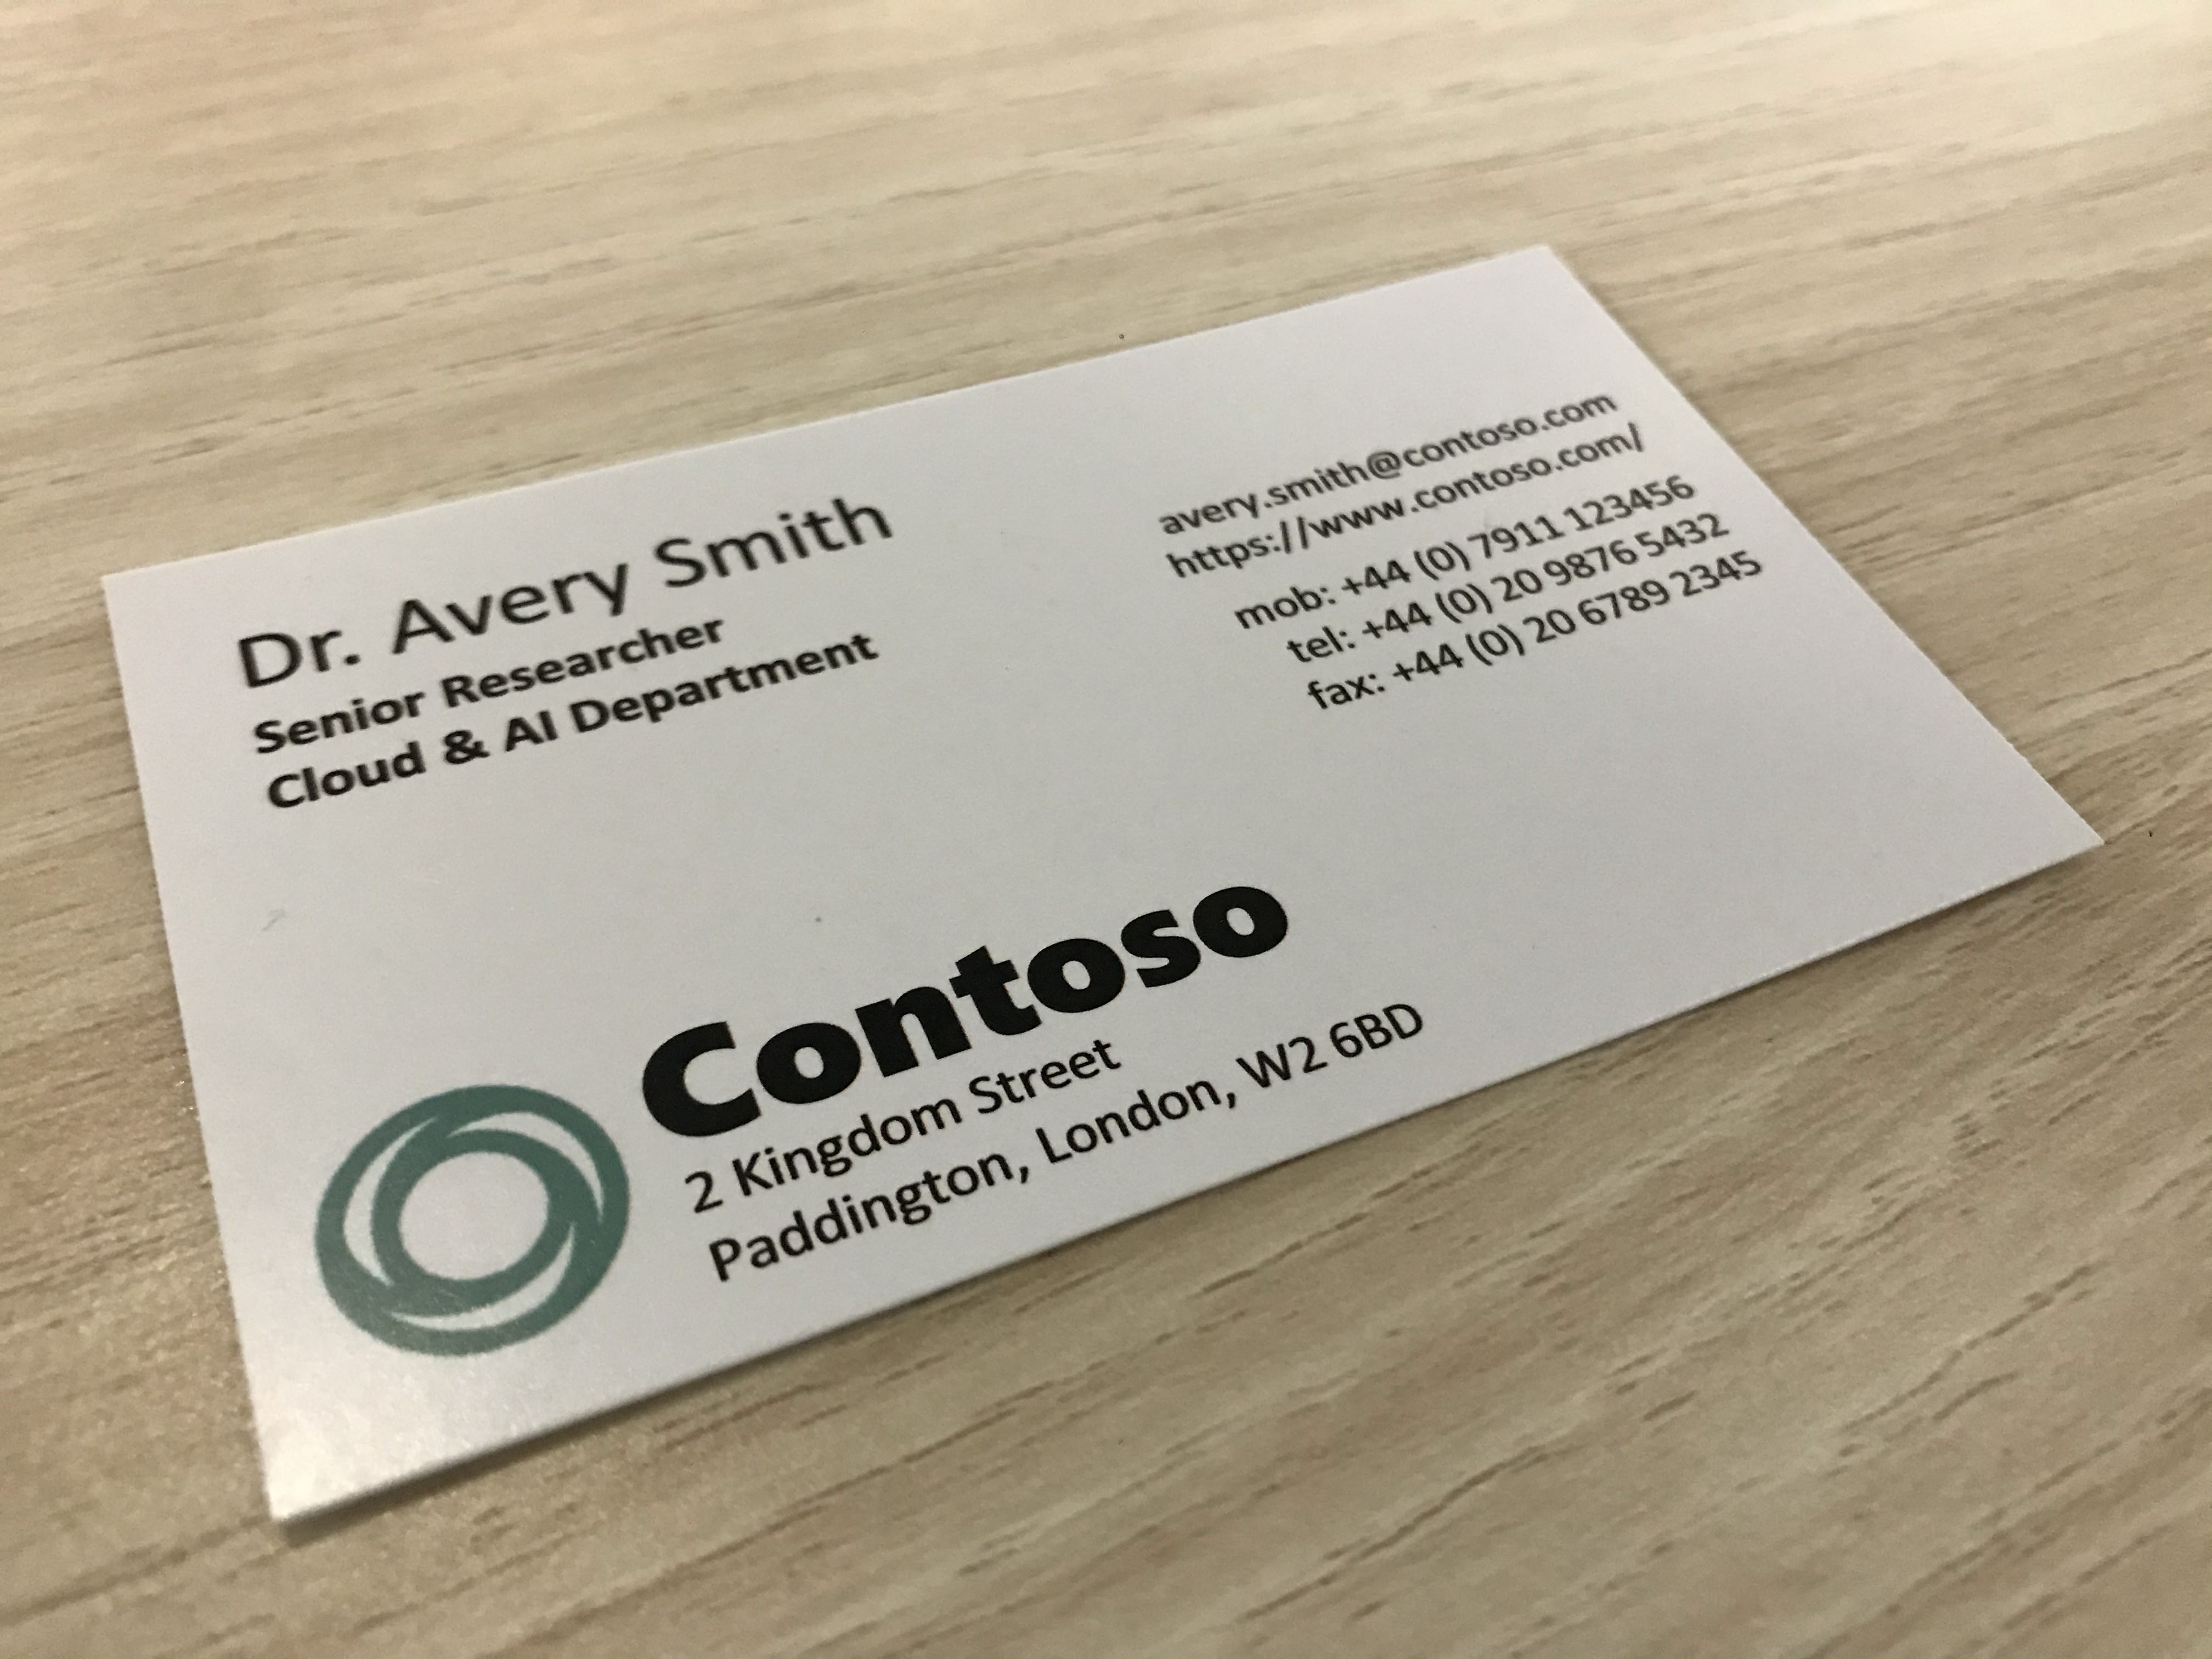 Photograph shows a business card from a company called Contoso.